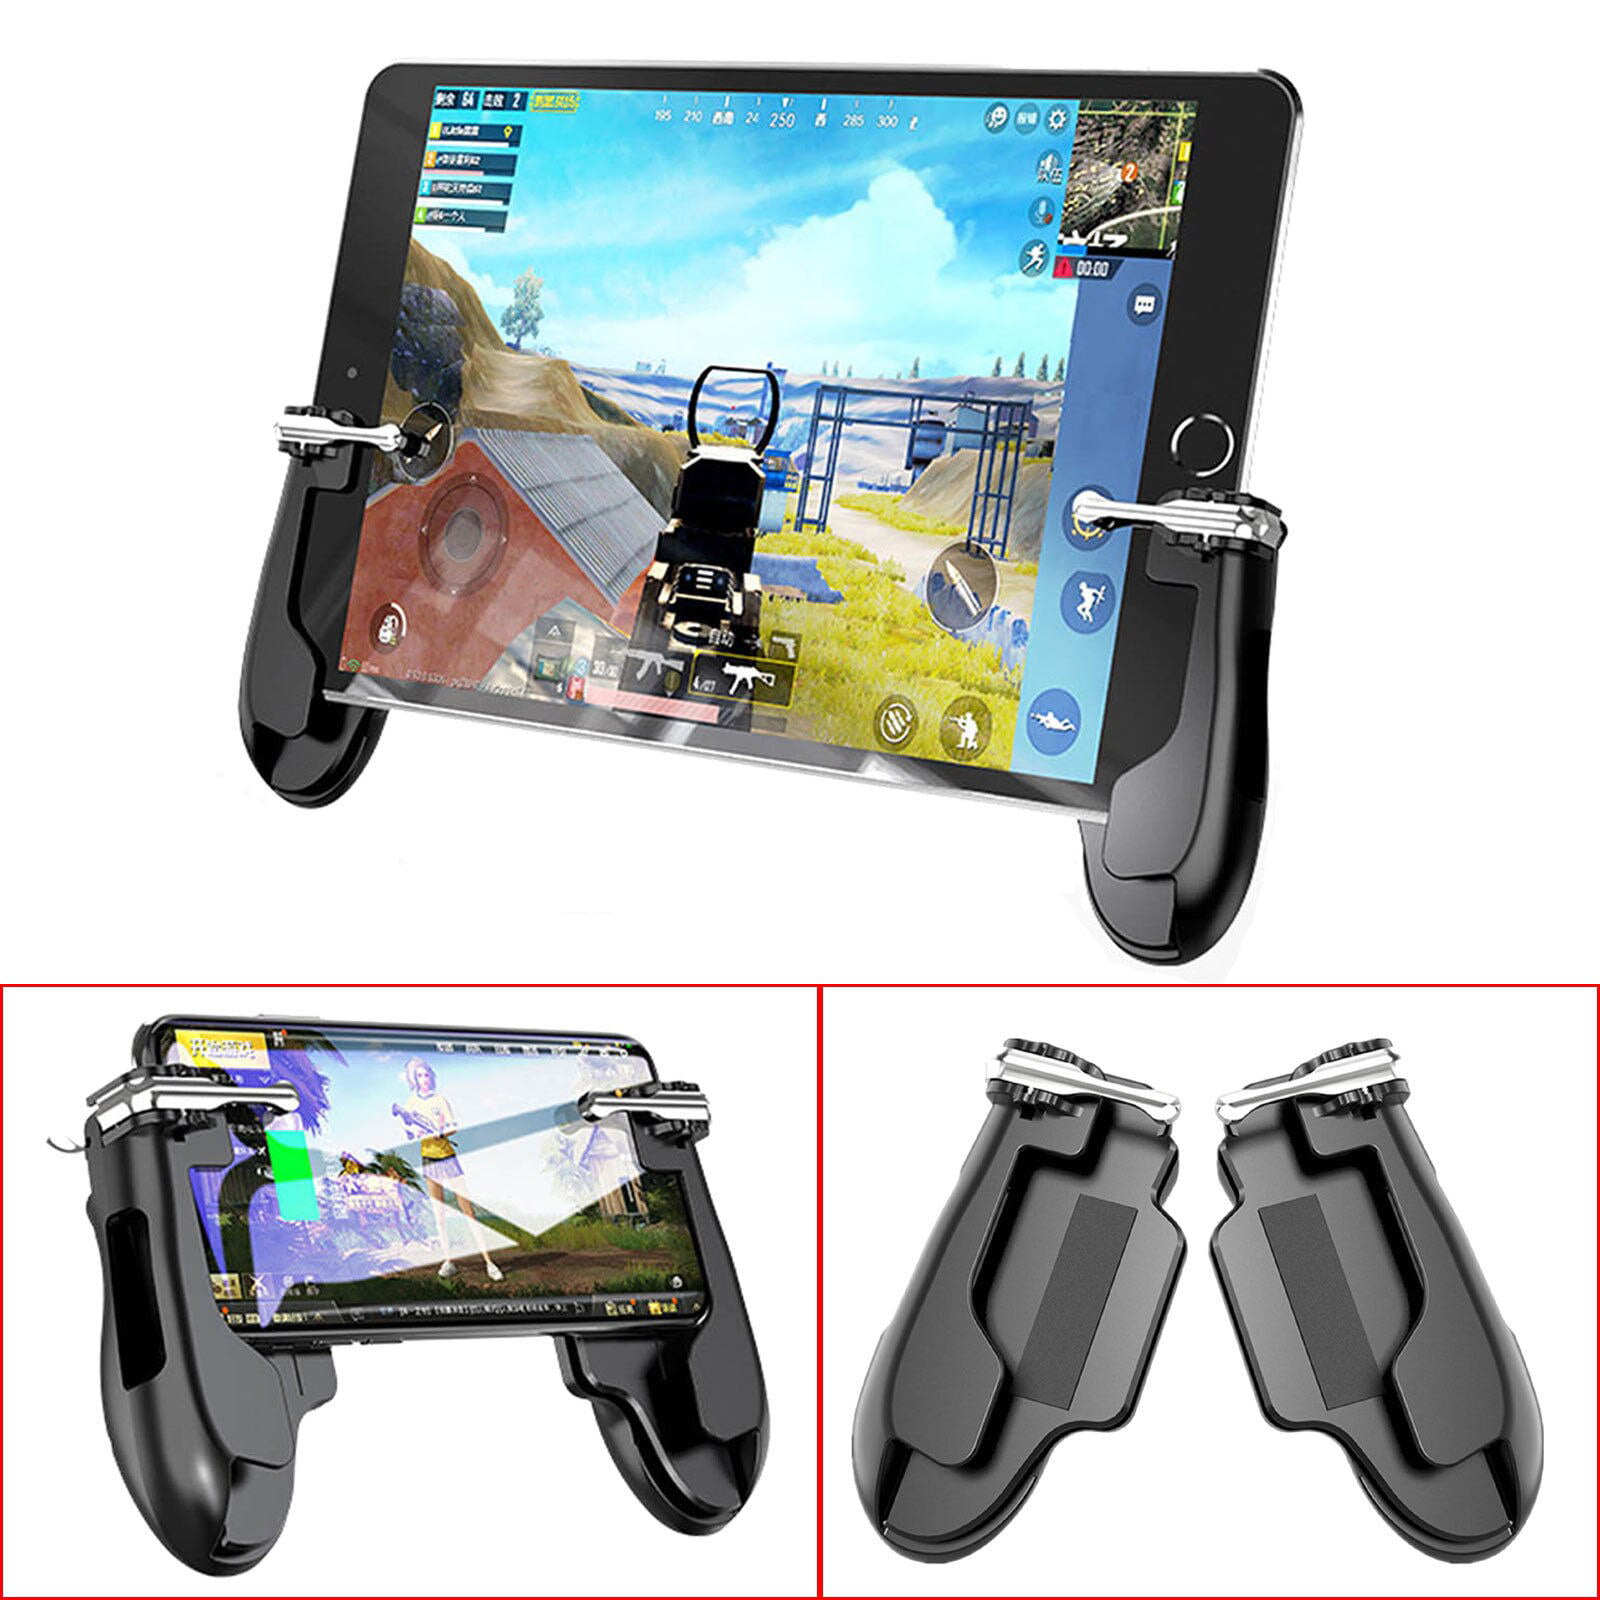 H2 Pubg Mobile Gamepad Gaming Trigger Shooter Controller For Ipad